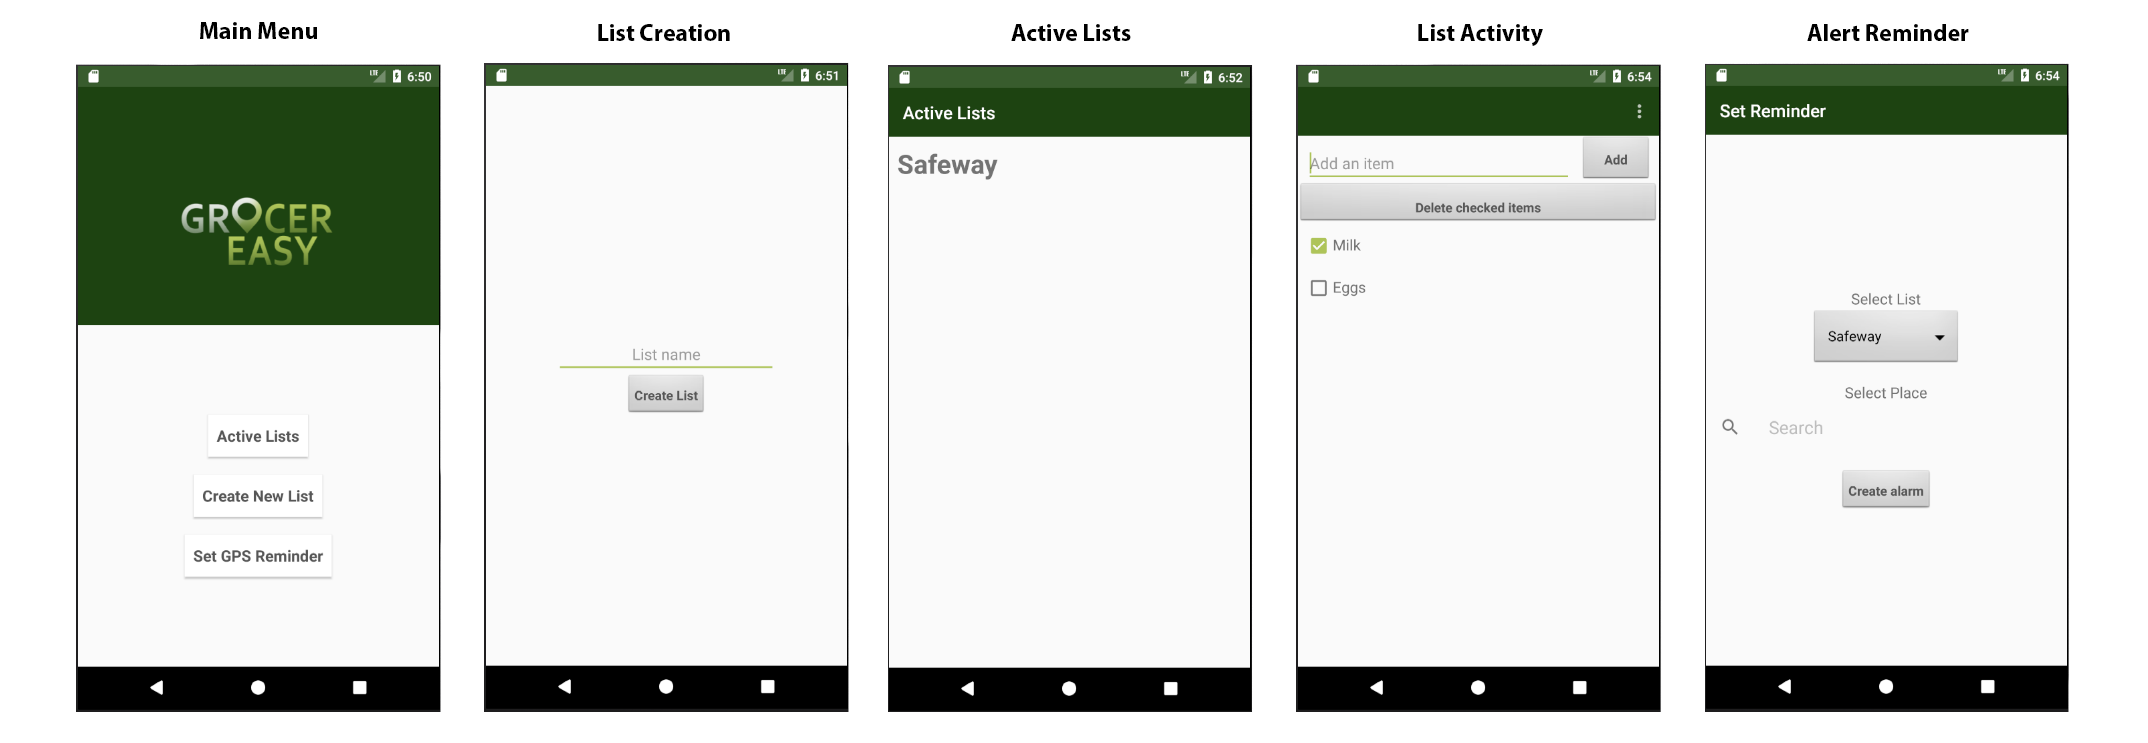 Image showing the second UI iterations of the app UI